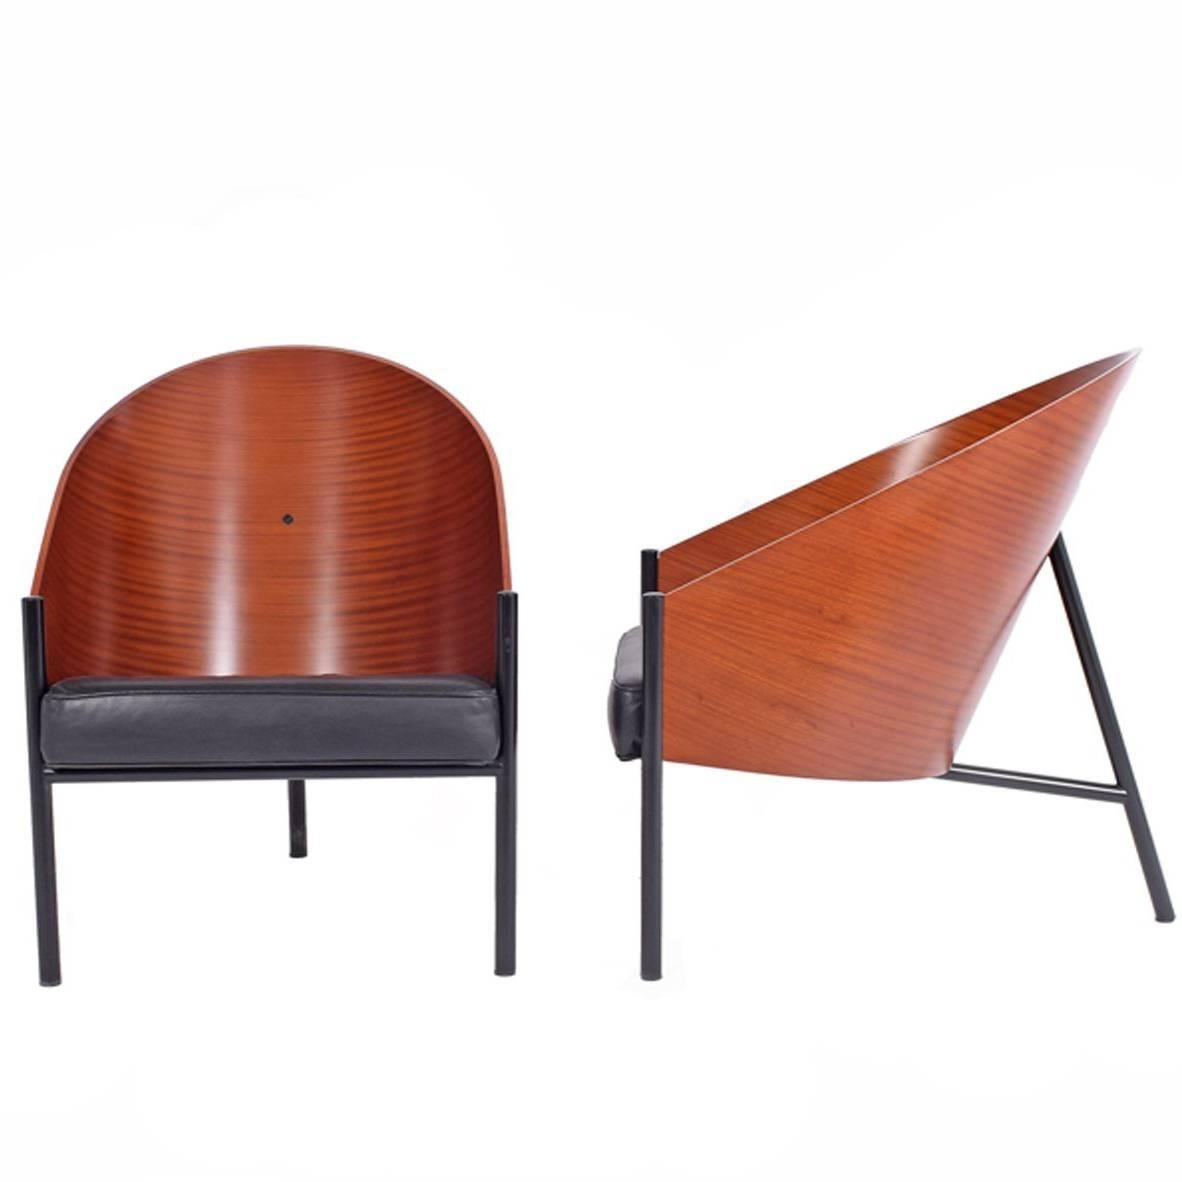 Pair of "Pratfall" Easy Chairs by Philippe Starck for Driade Aleph